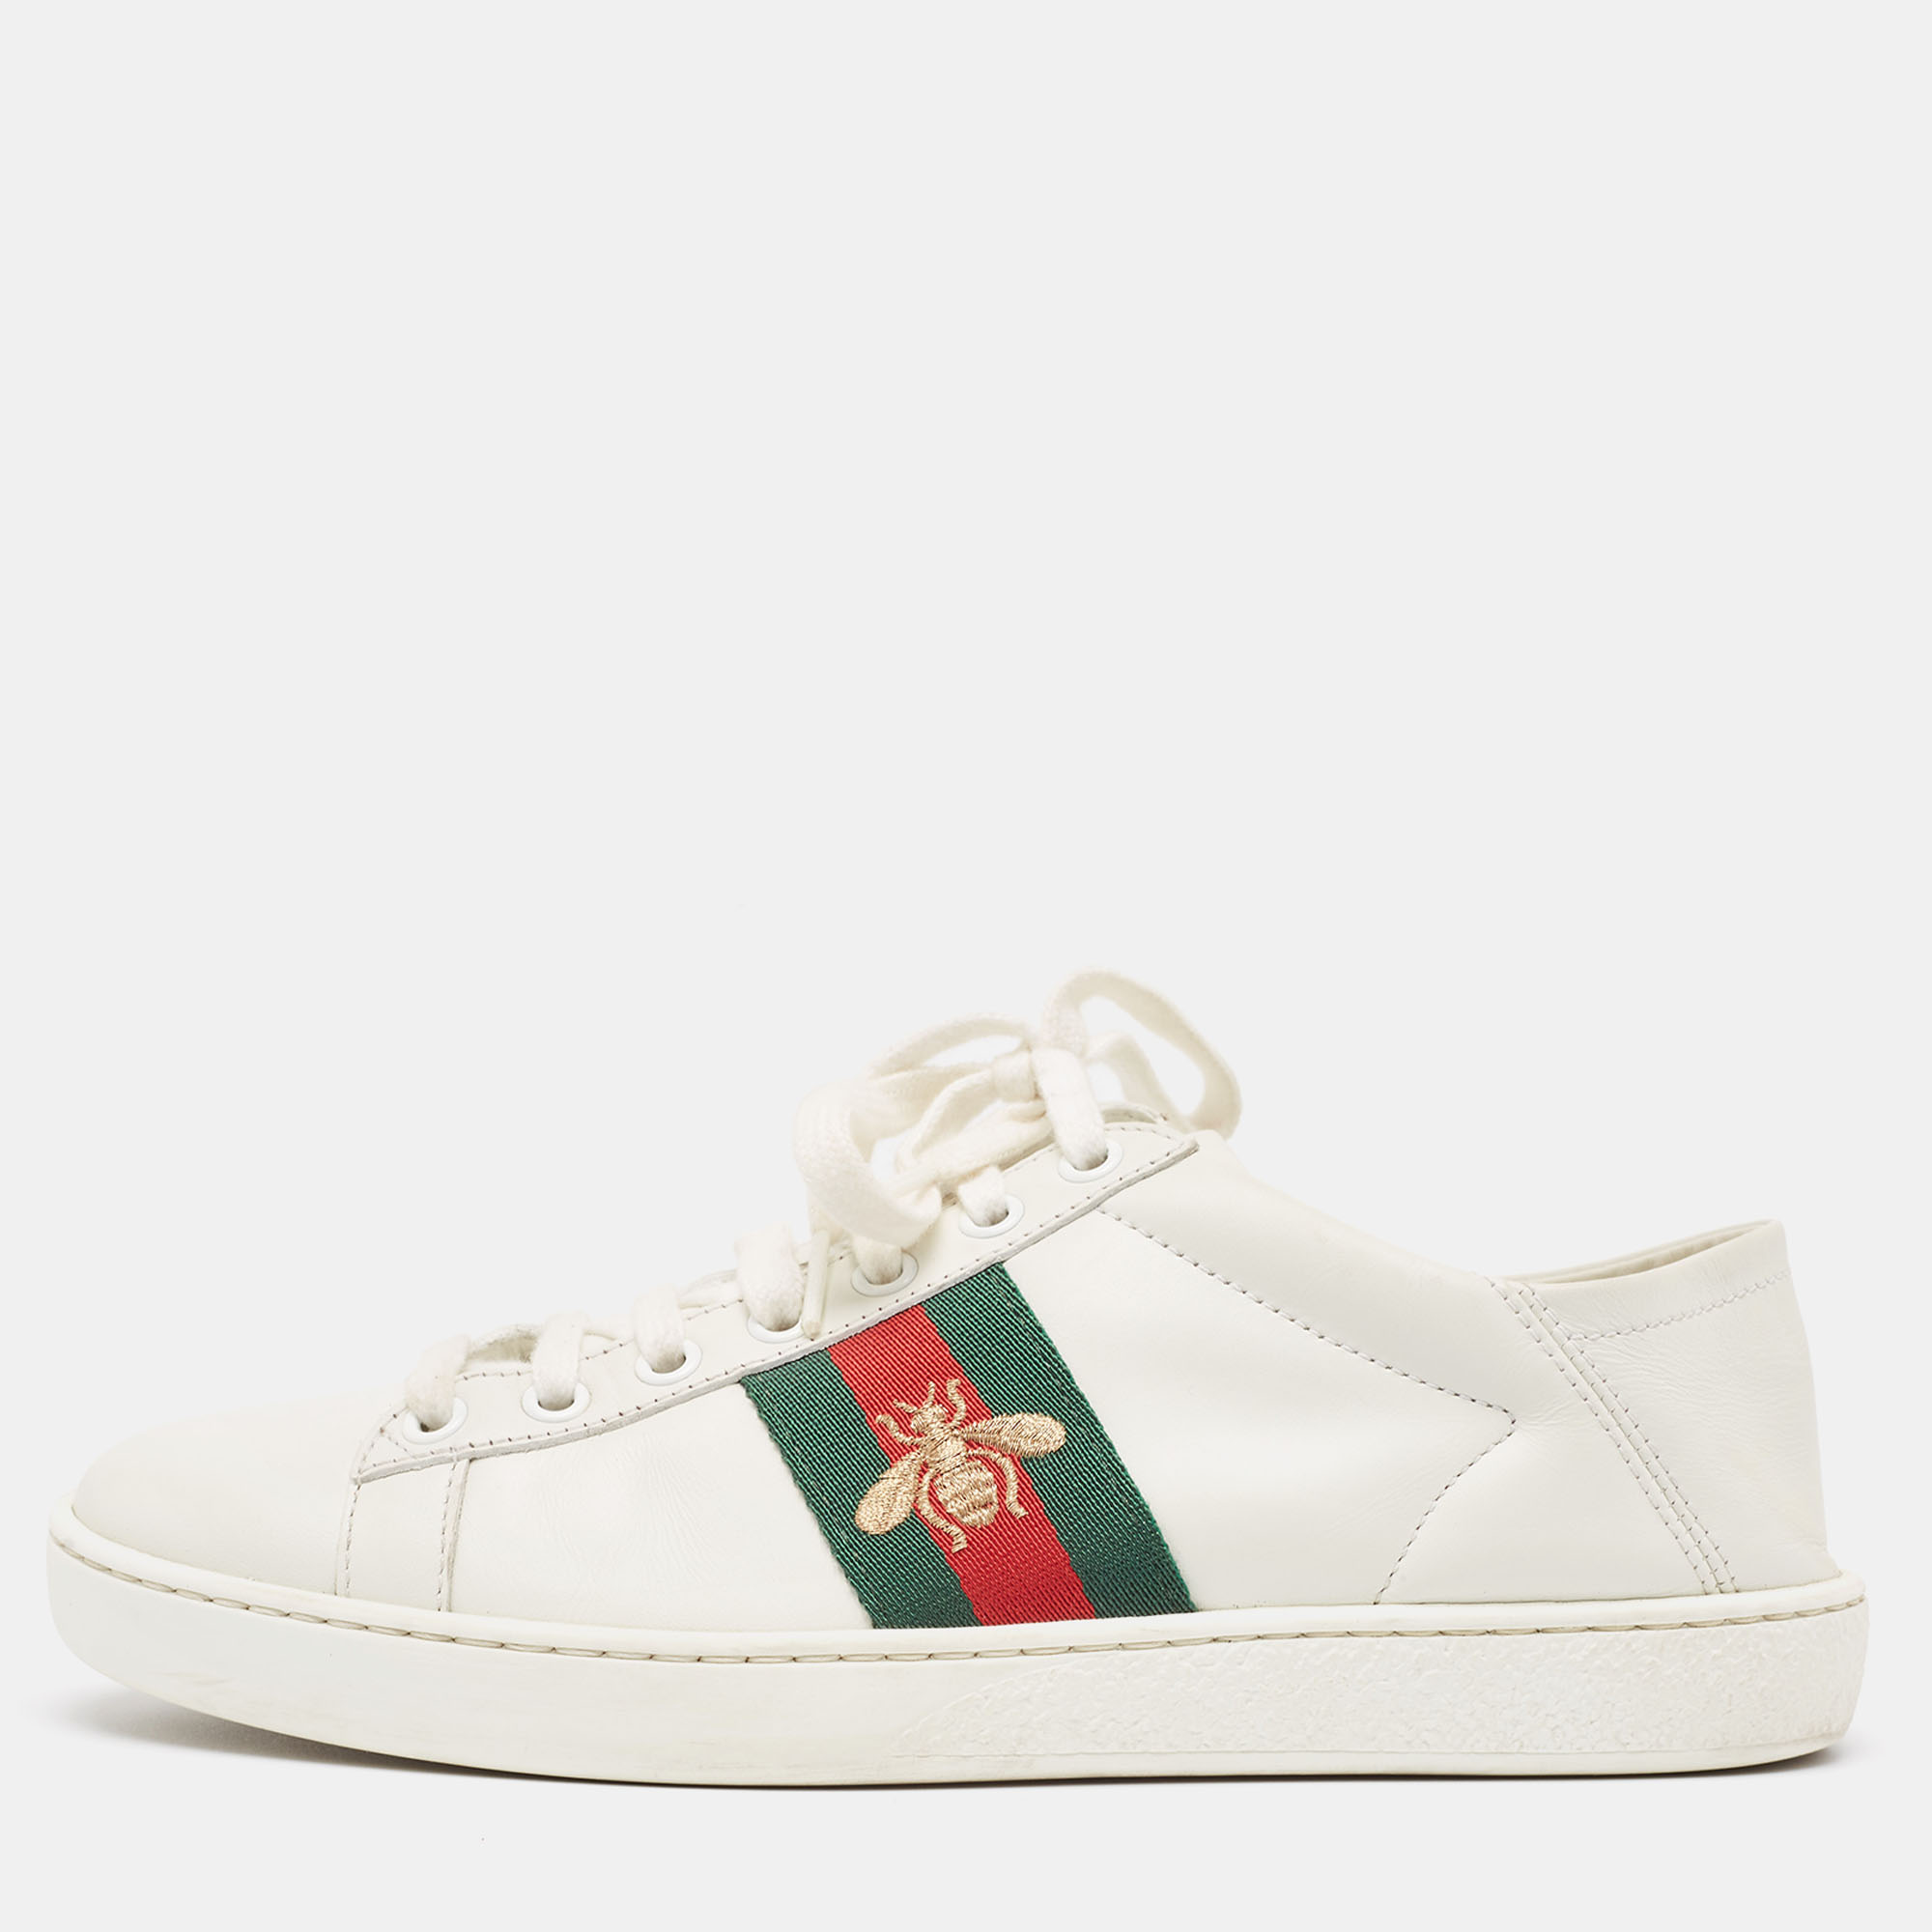 Pre-owned Gucci White Leather Web Ace Low Top Sneakers Size 37